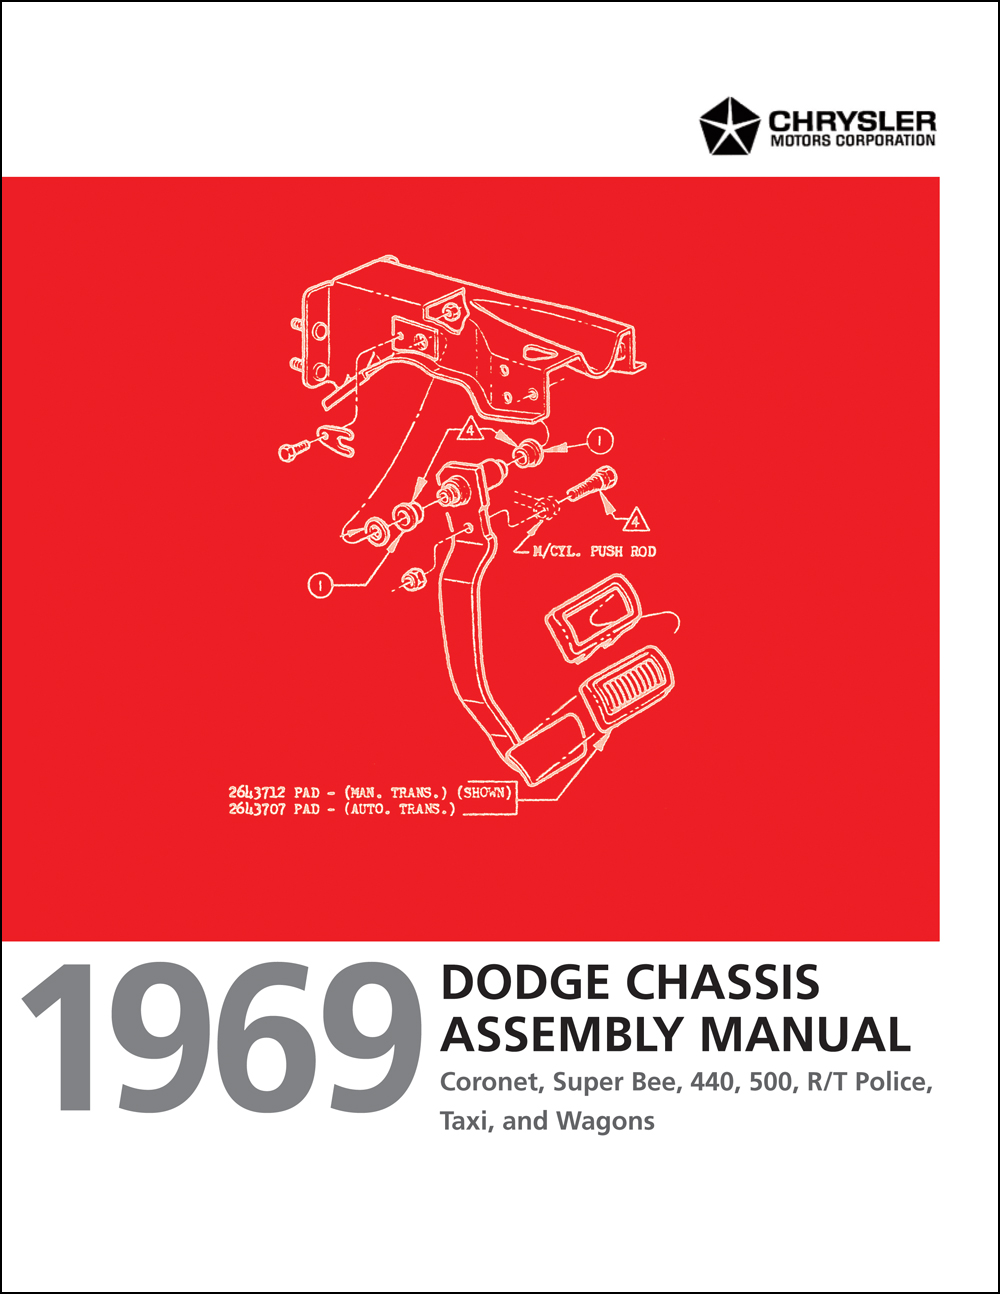 1969 Dodge Coronet and Super Bee Chassis Assembly Manual Reprint